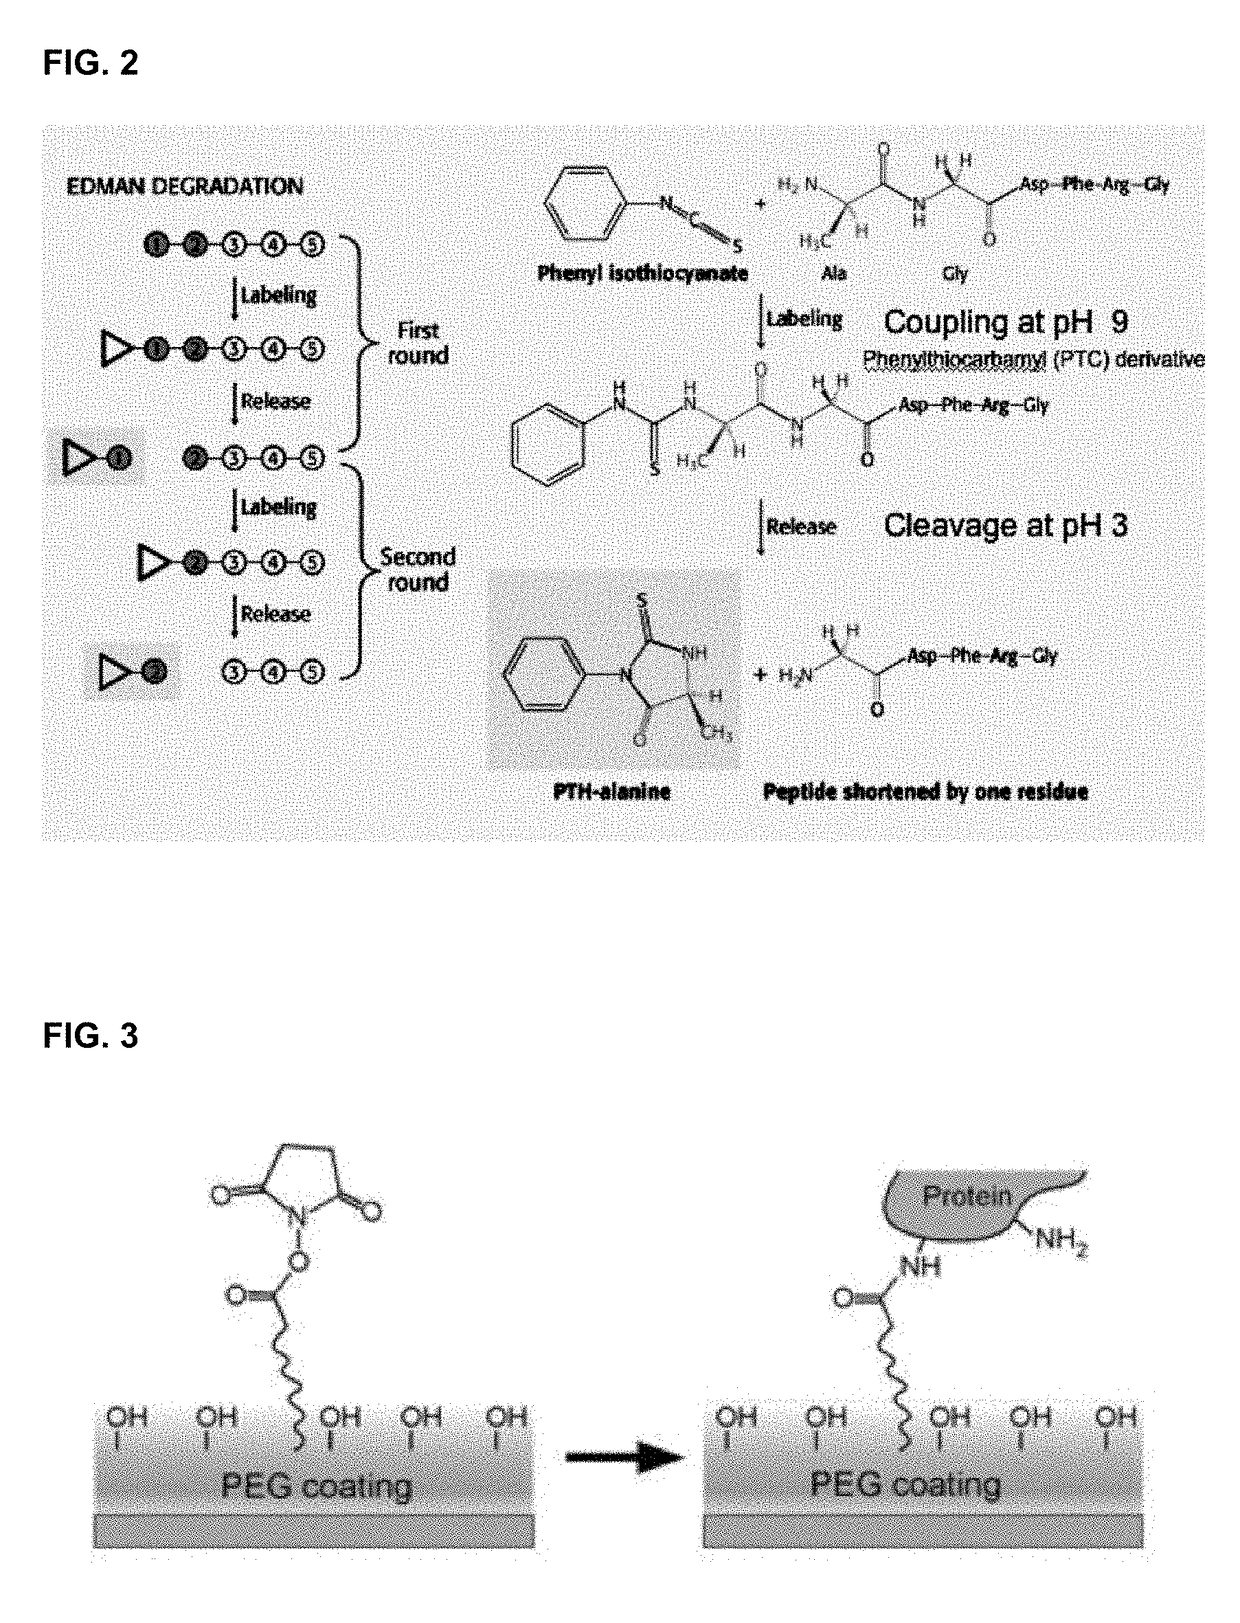 Protein sequencing method and reagents